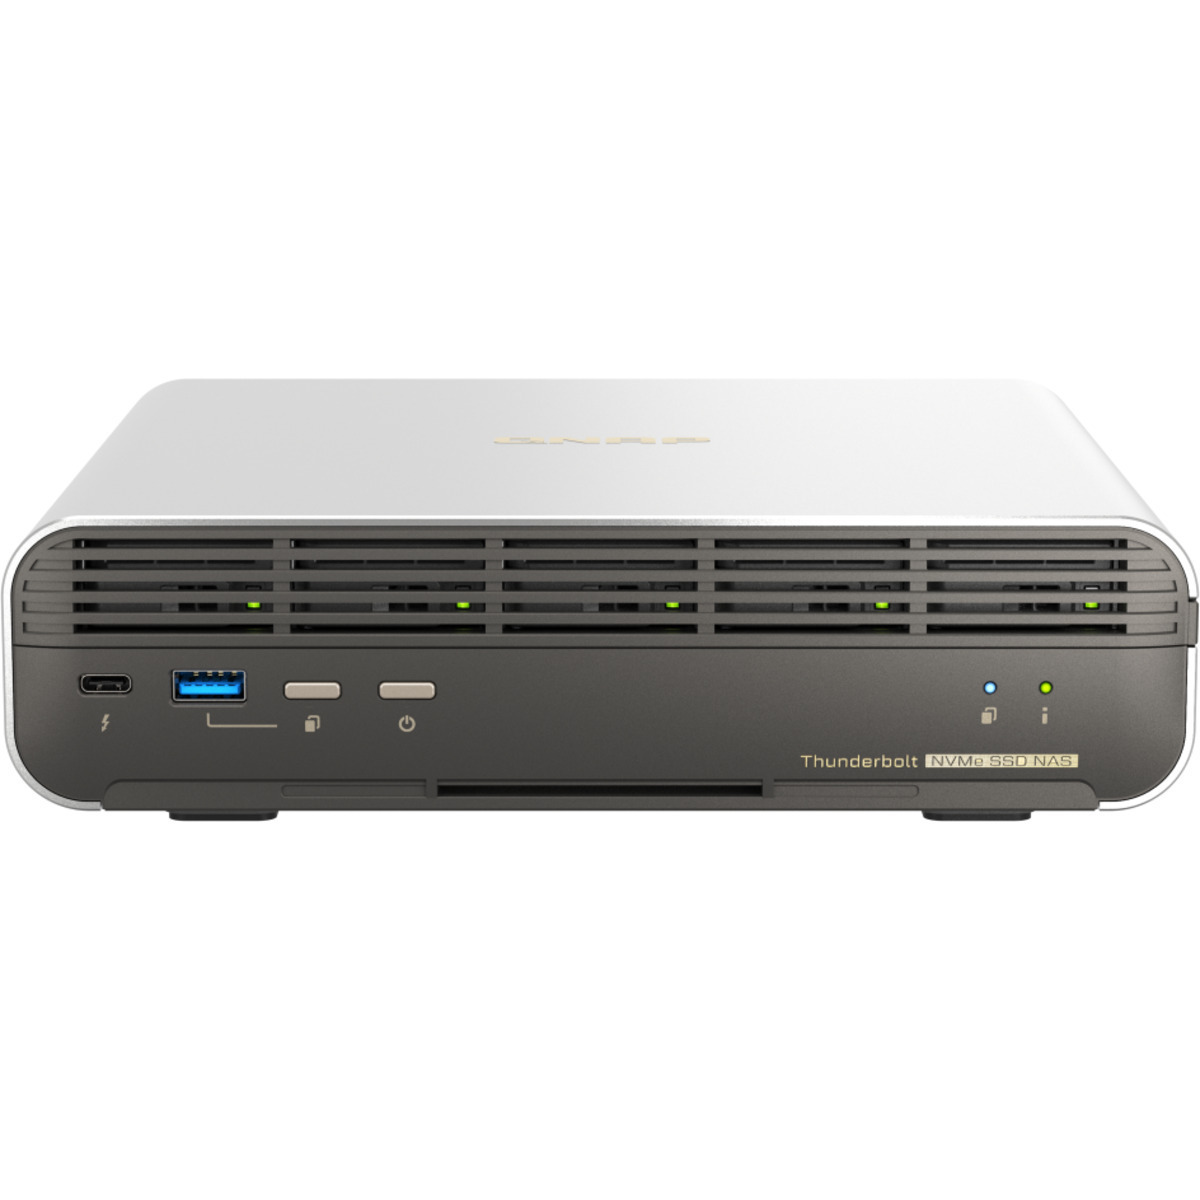 QNAP TBS-h574TX Core i3 Thunderbolt 4 1tb 5-Bay Desktop Multimedia / Power User / Business DAS-NAS - Combo Direct + Network Storage Device 4x250gb Sandisk Plus Series SDSSDA3N-250G  2400/1500MB/s M.2 2280 NVMe SSD CONSUMER Class Drives Installed - Burn-In Tested TBS-h574TX Core i3 Thunderbolt 4